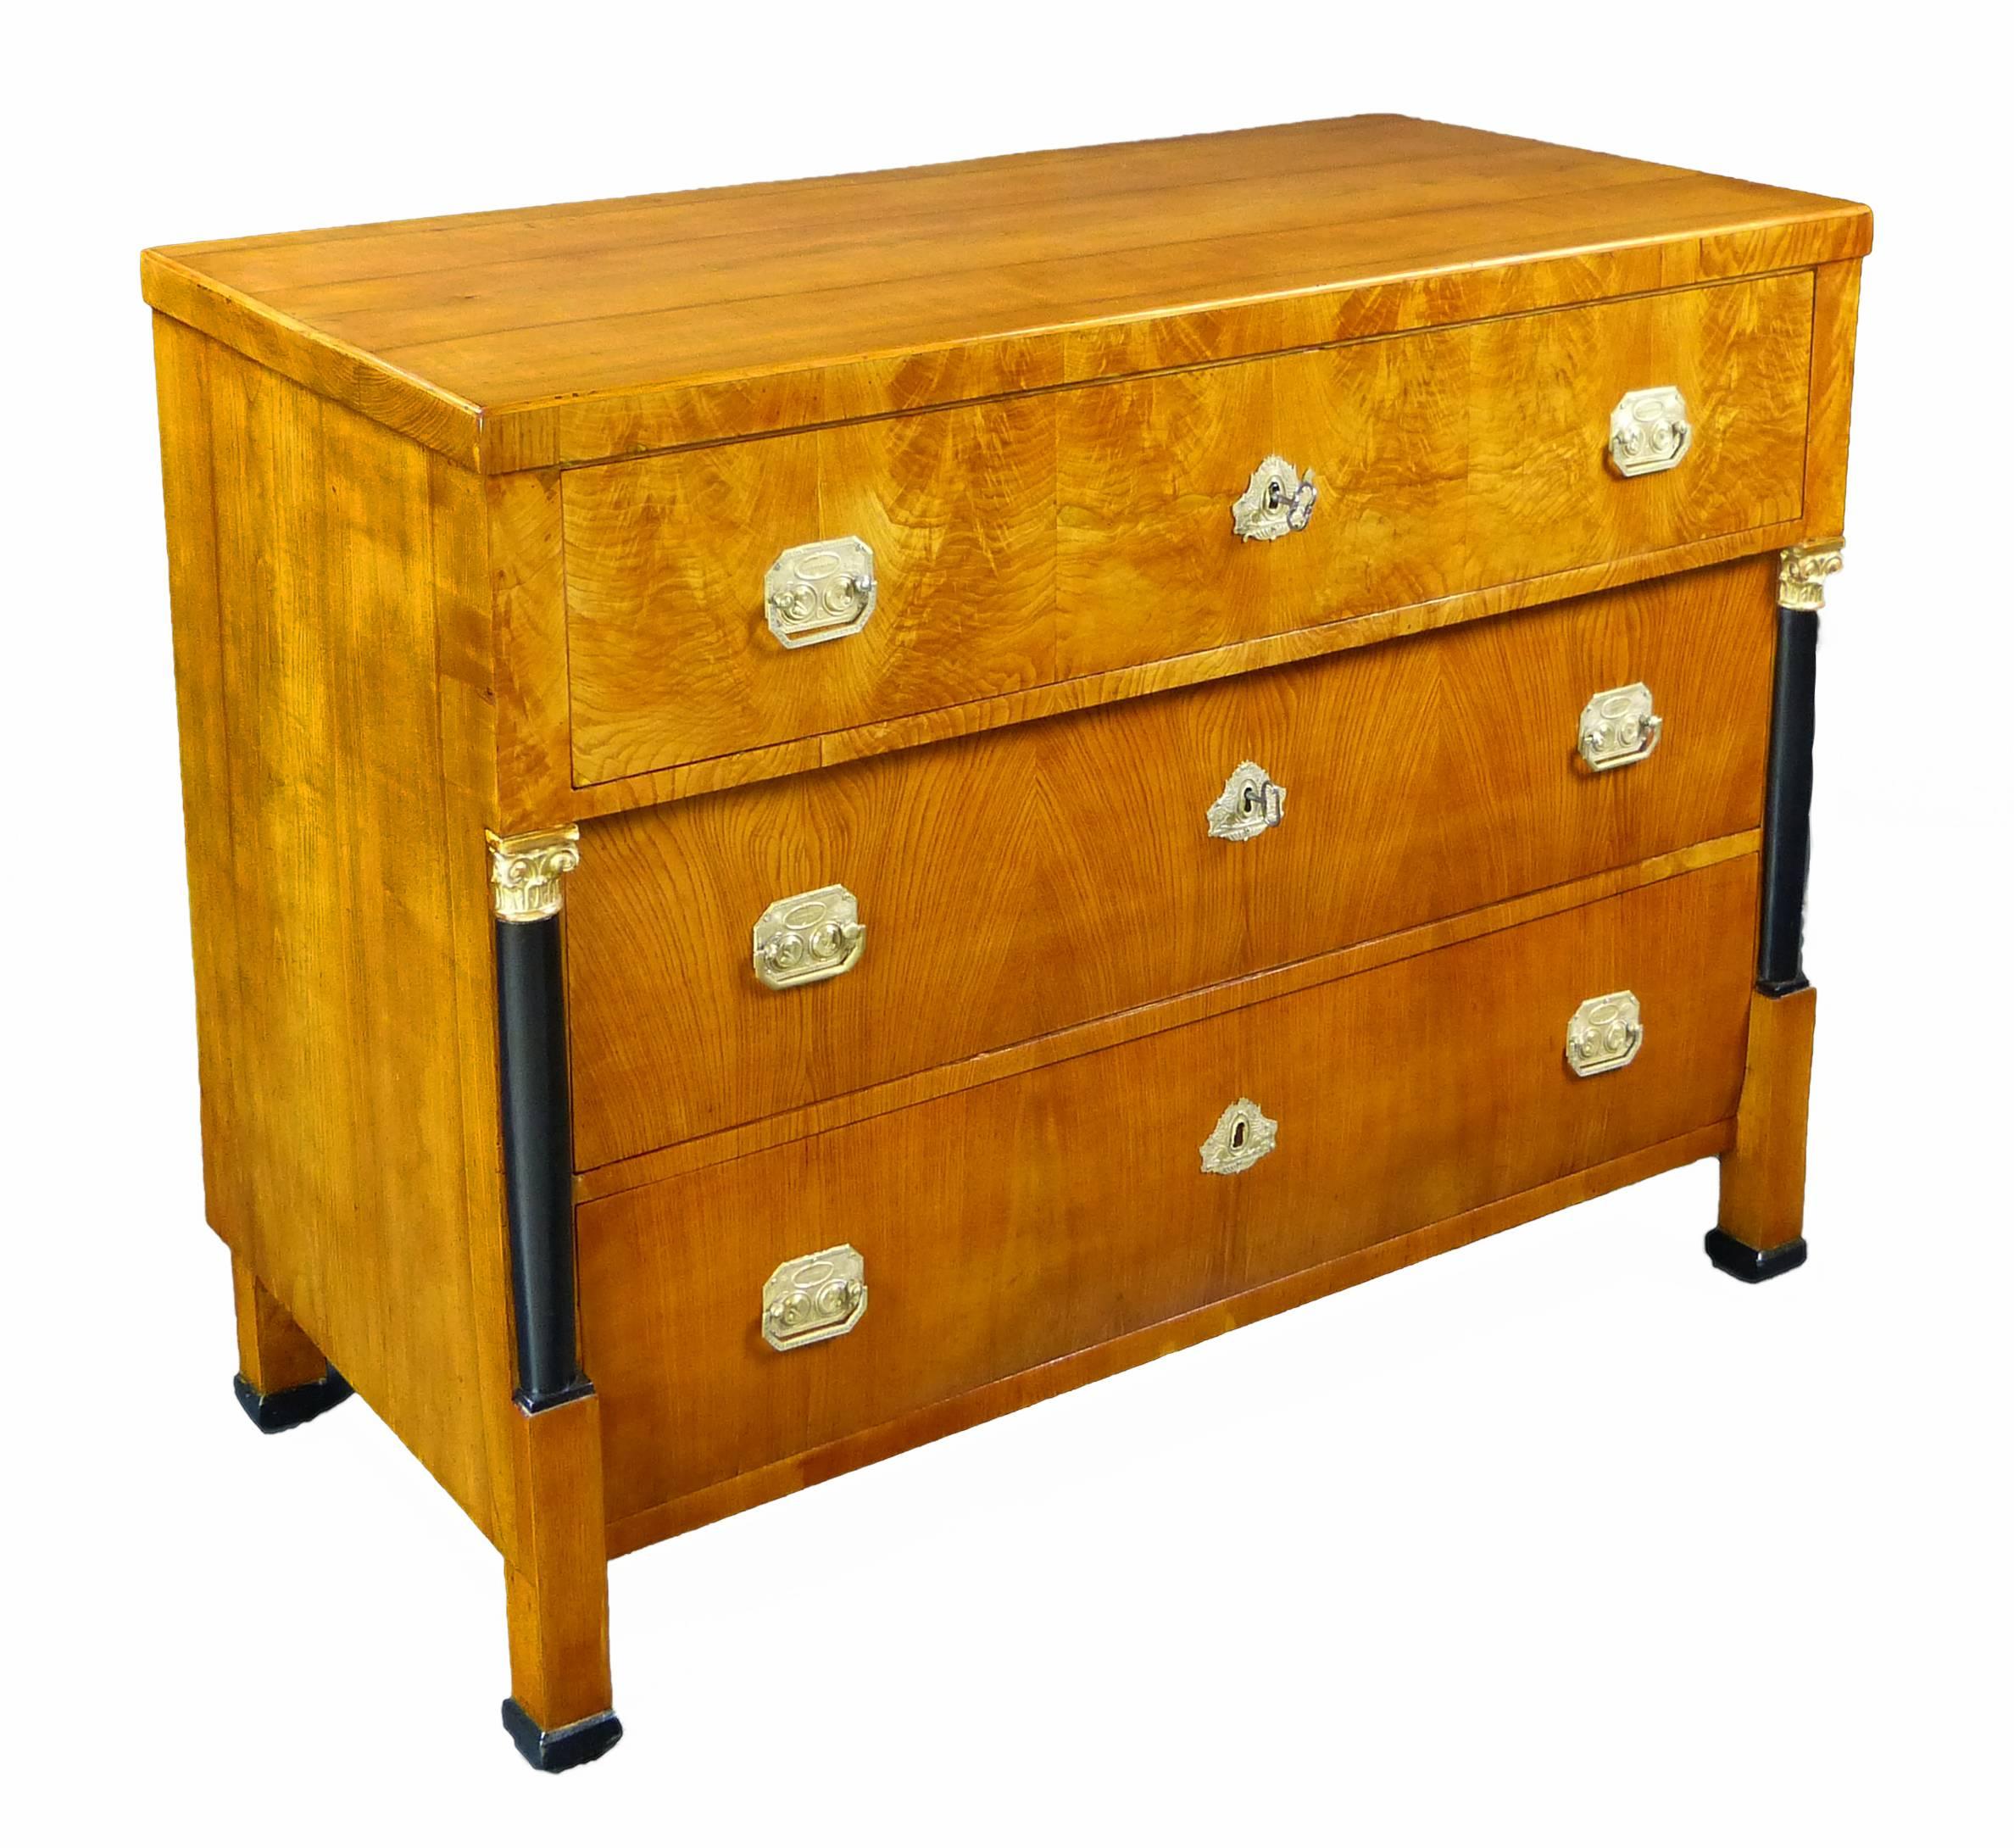 Fine late Empire early Biedermeier commode of German origin made of elm and burr elm veneer. There are 2 frontal ebonized columns with giltwood Ionic capitals. The 3 graduated drawers feature commemorative pressed brass pulls that feature 2